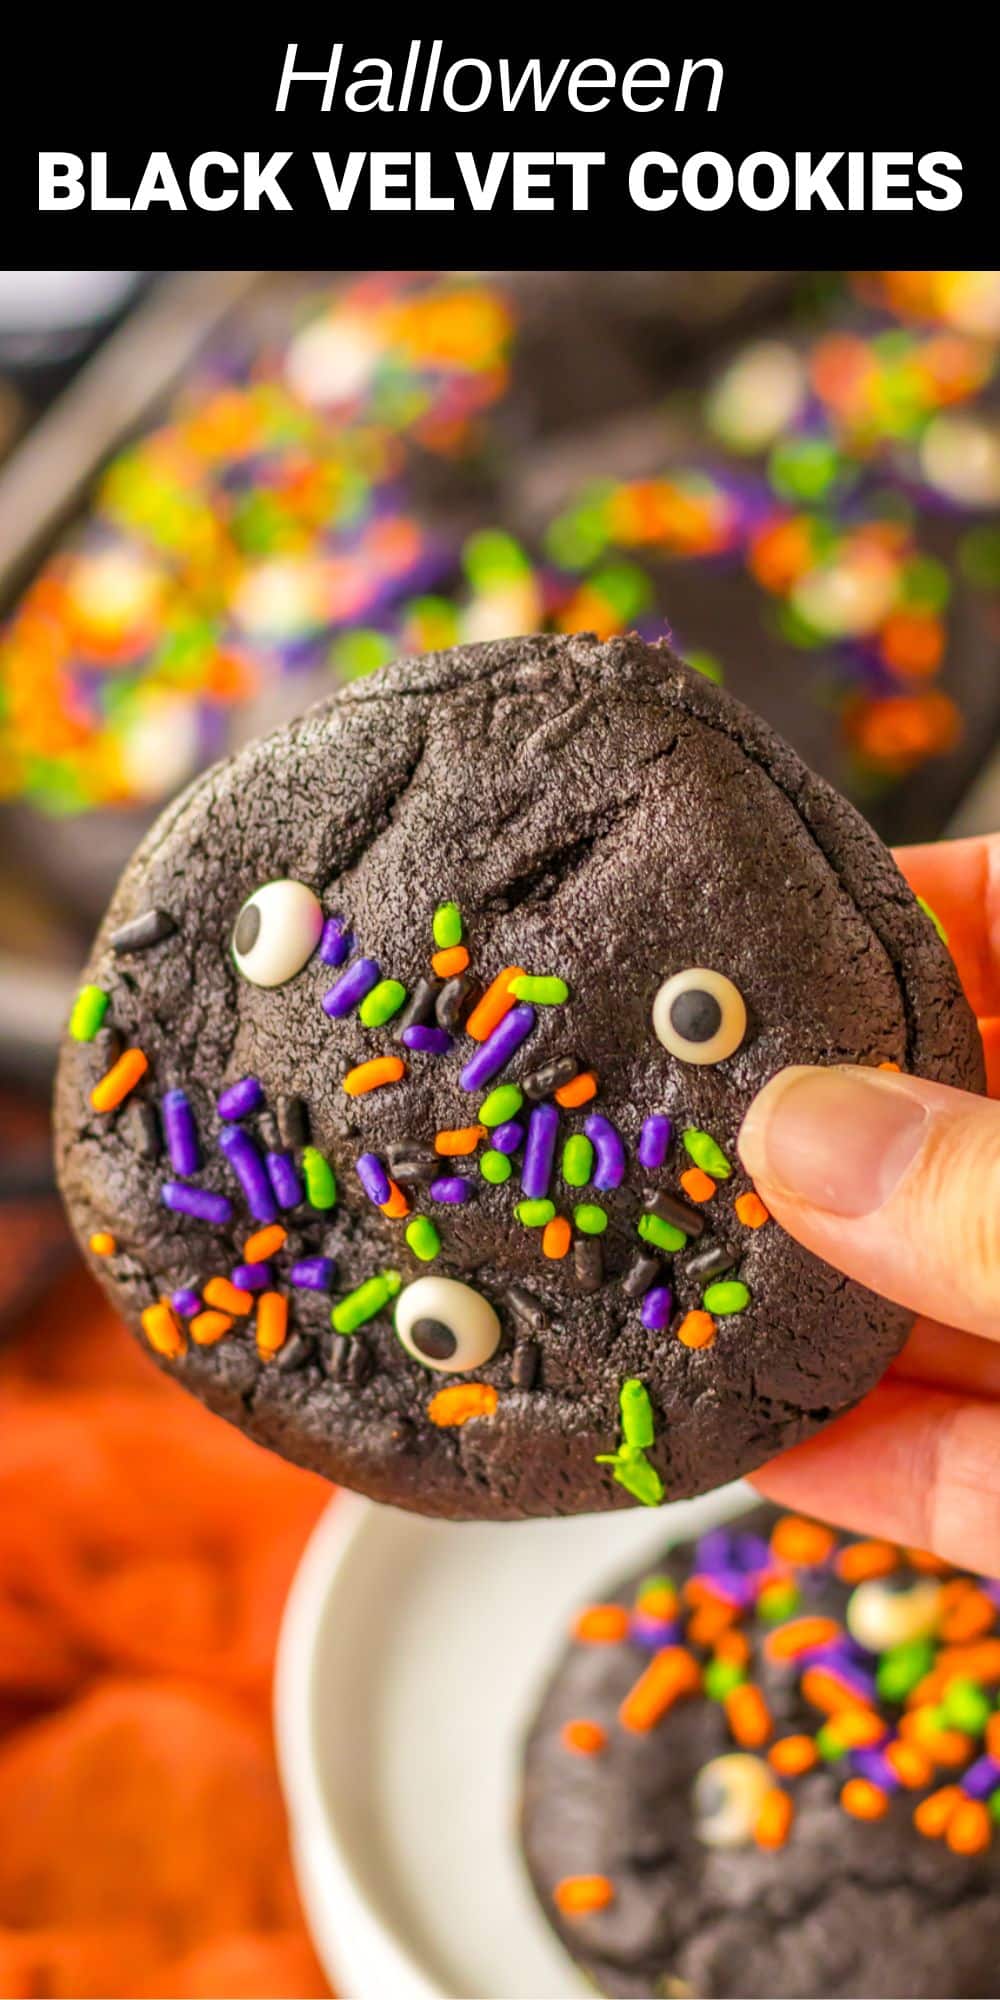 These Halloween black velvet cookies are a delicious and eye-catching treat that’s perfect for the spooky season. With their bold colors, soft velvety texture, and rich chocolate flavor, they’re sure to be the star of any Halloween party.